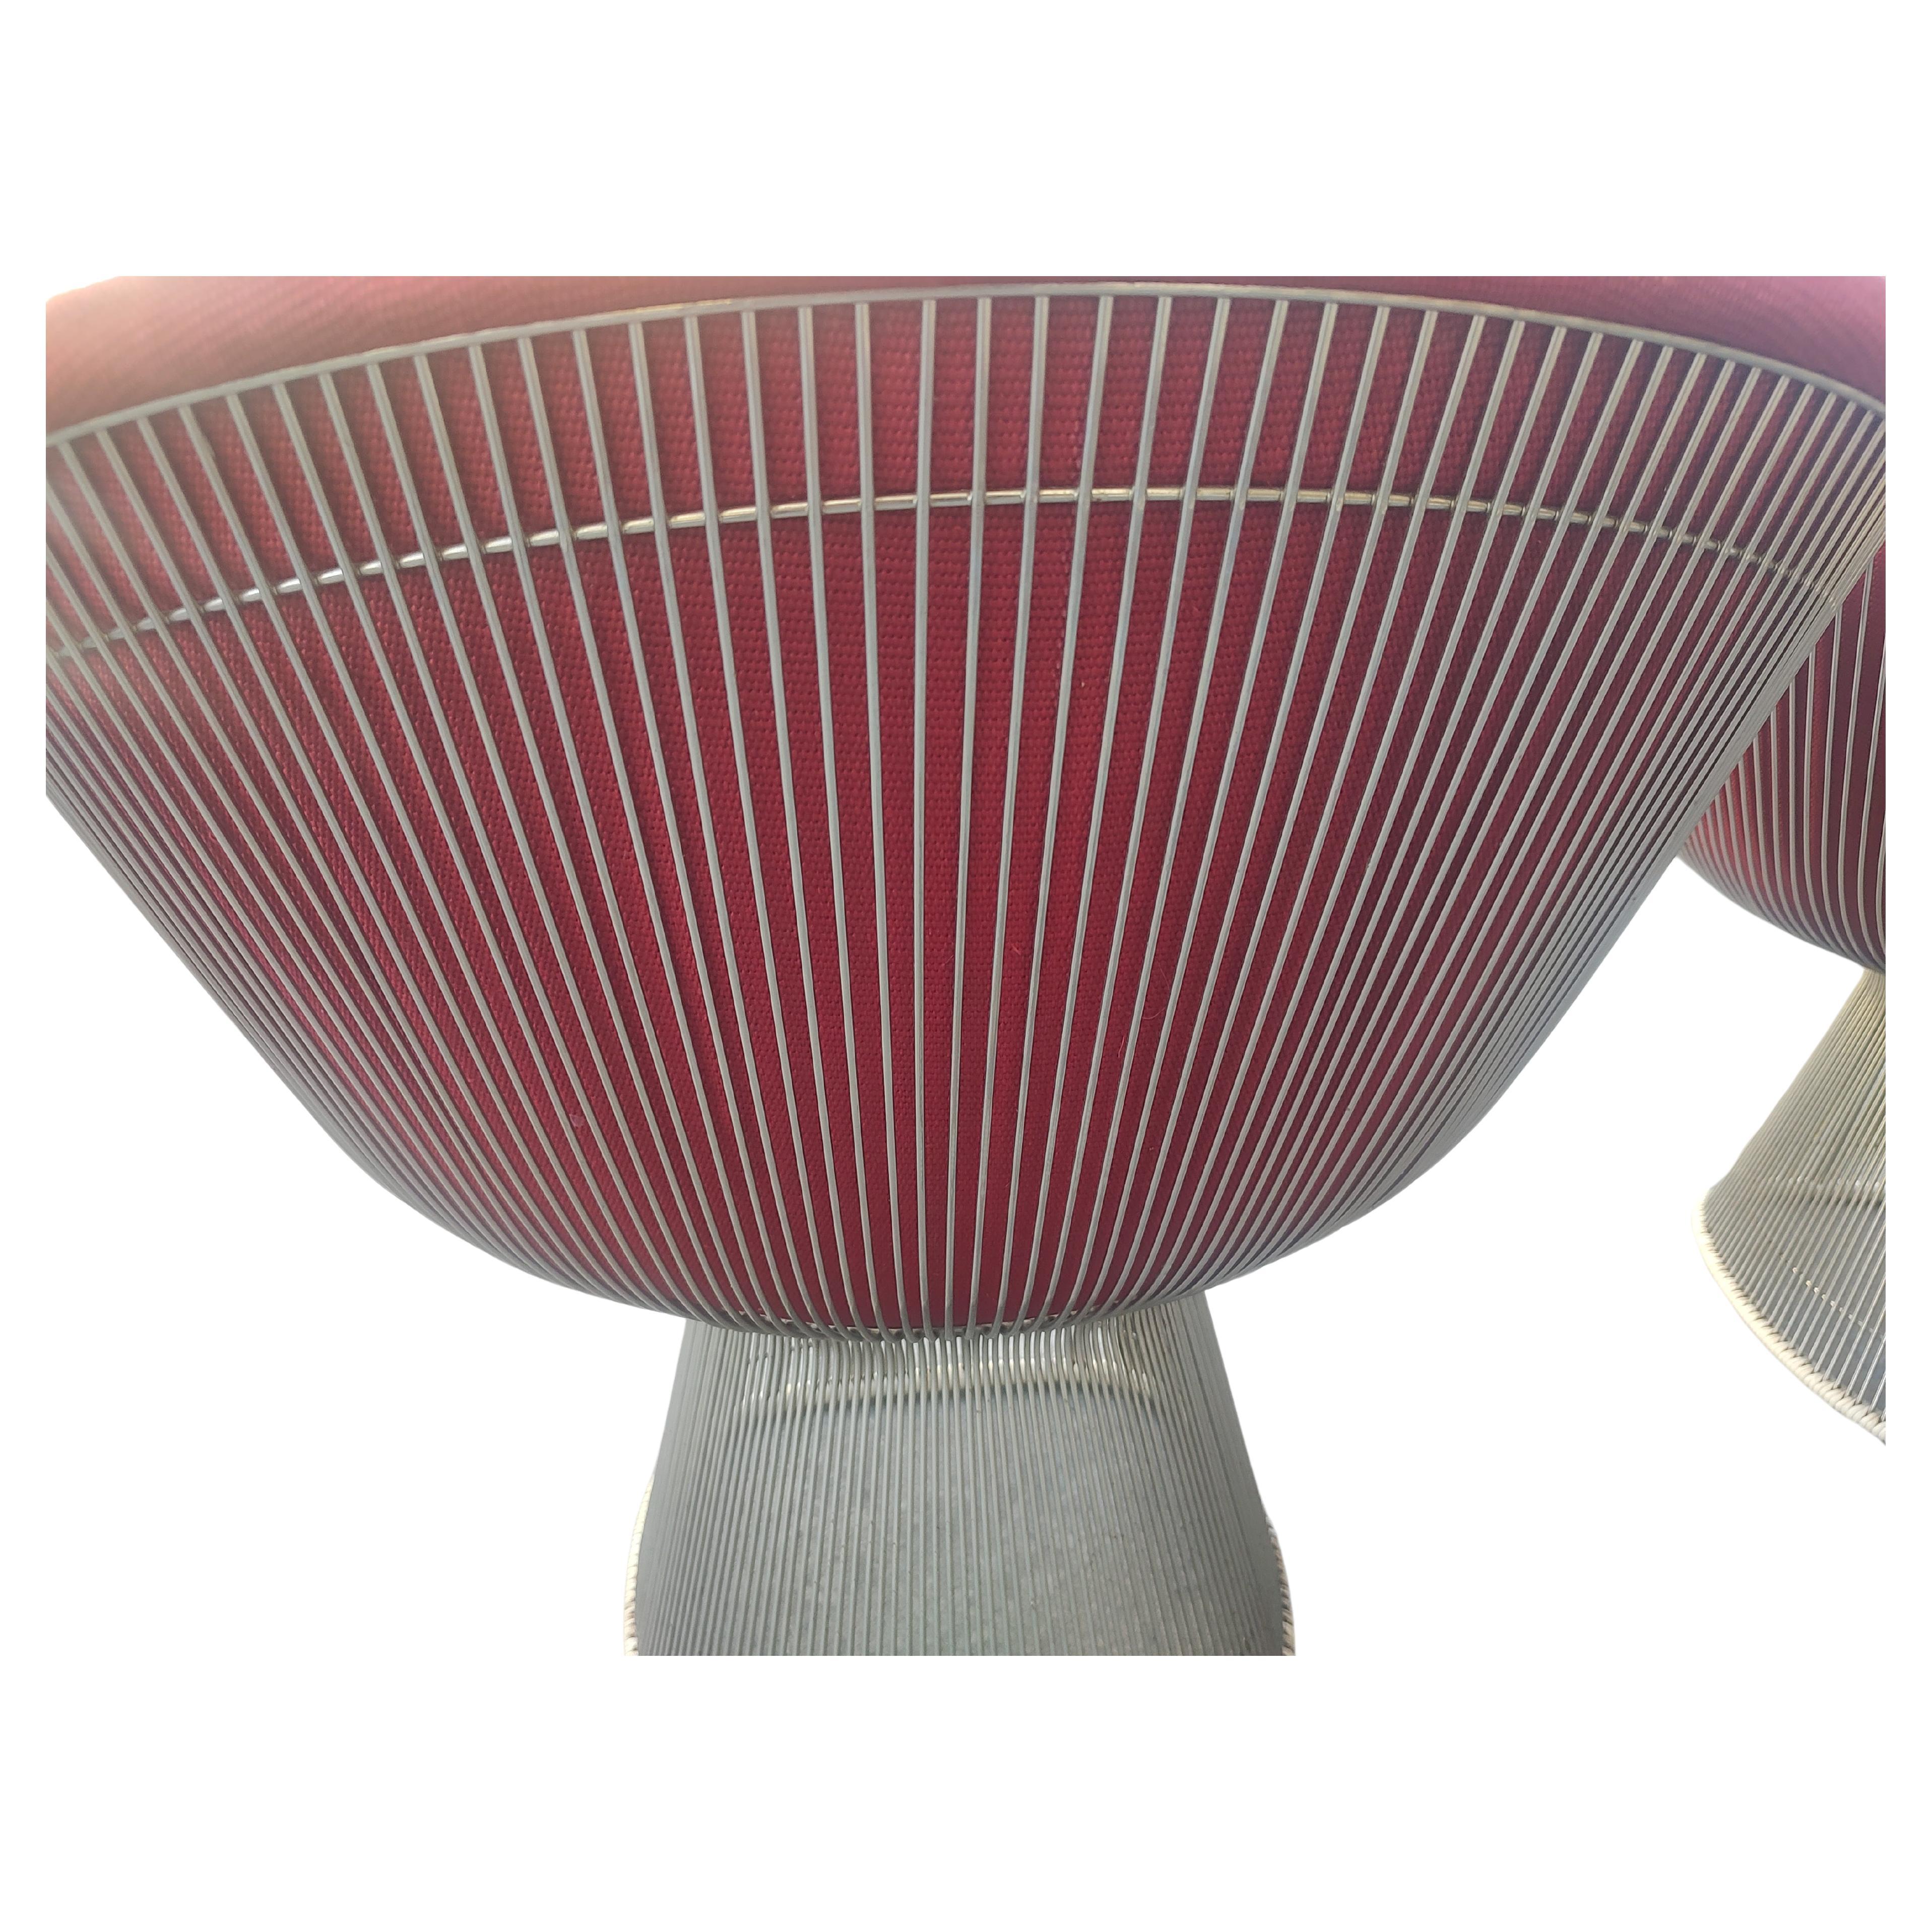 Pair of Warren Platner Mid Century Modern Lounge Chairs for Knoll C1965 For Sale 2